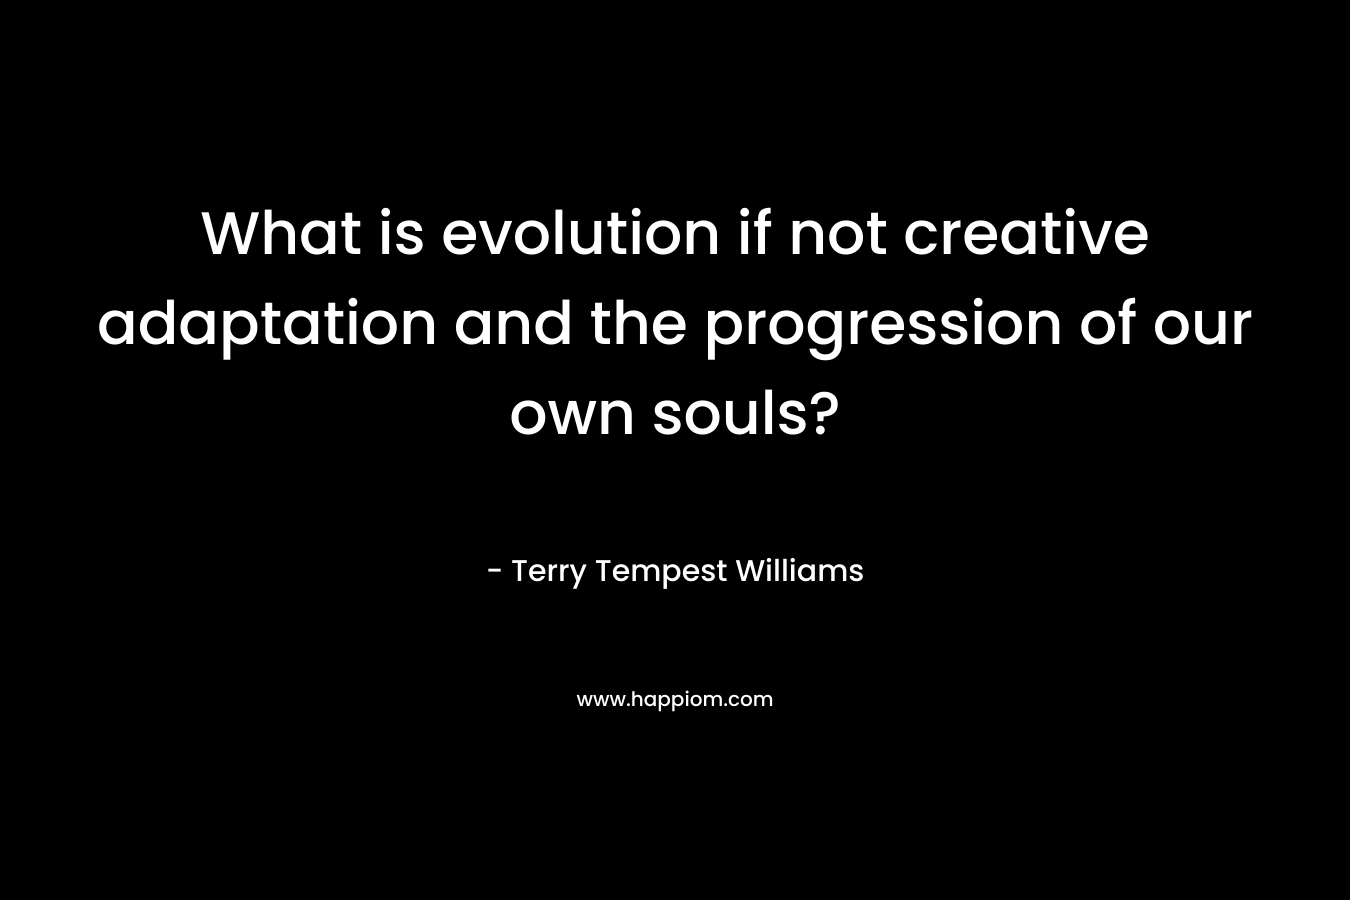 What is evolution if not creative adaptation and the progression of our own souls? – Terry Tempest Williams